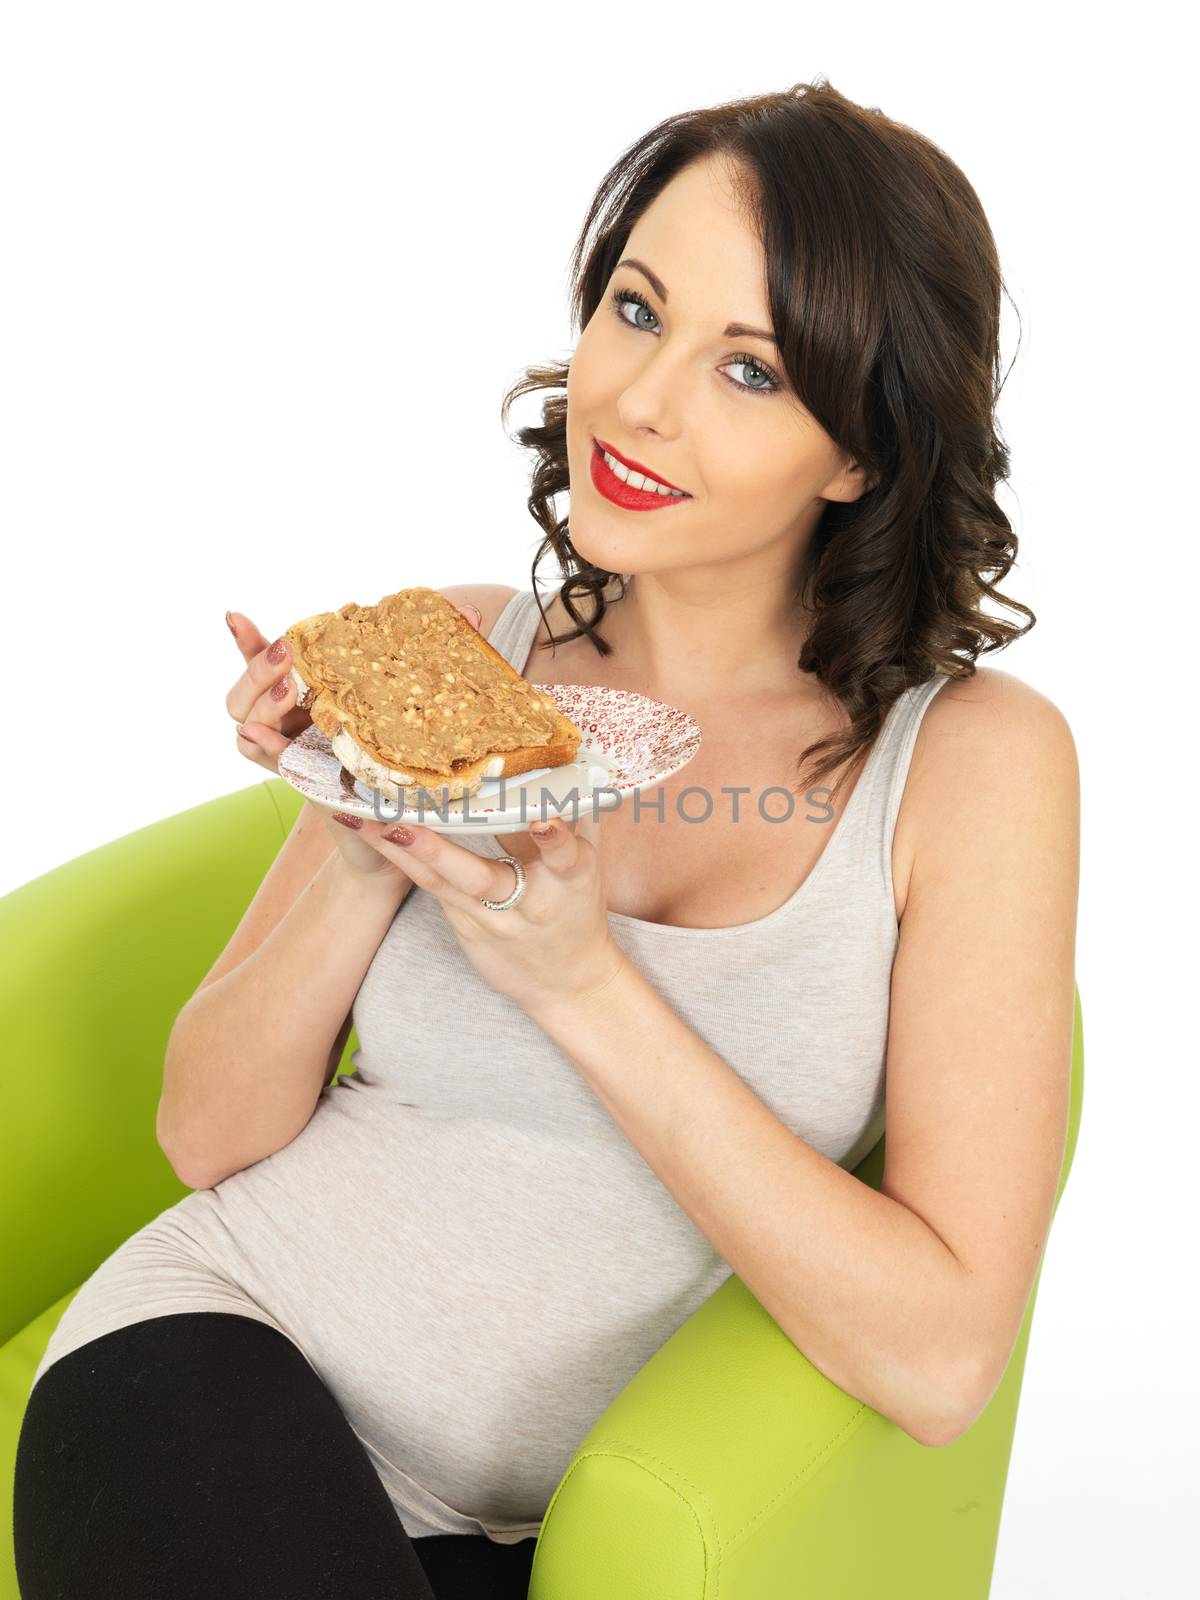 Young Woman Holding Toast with Crunchy Peanut Butter by Whiteboxmedia